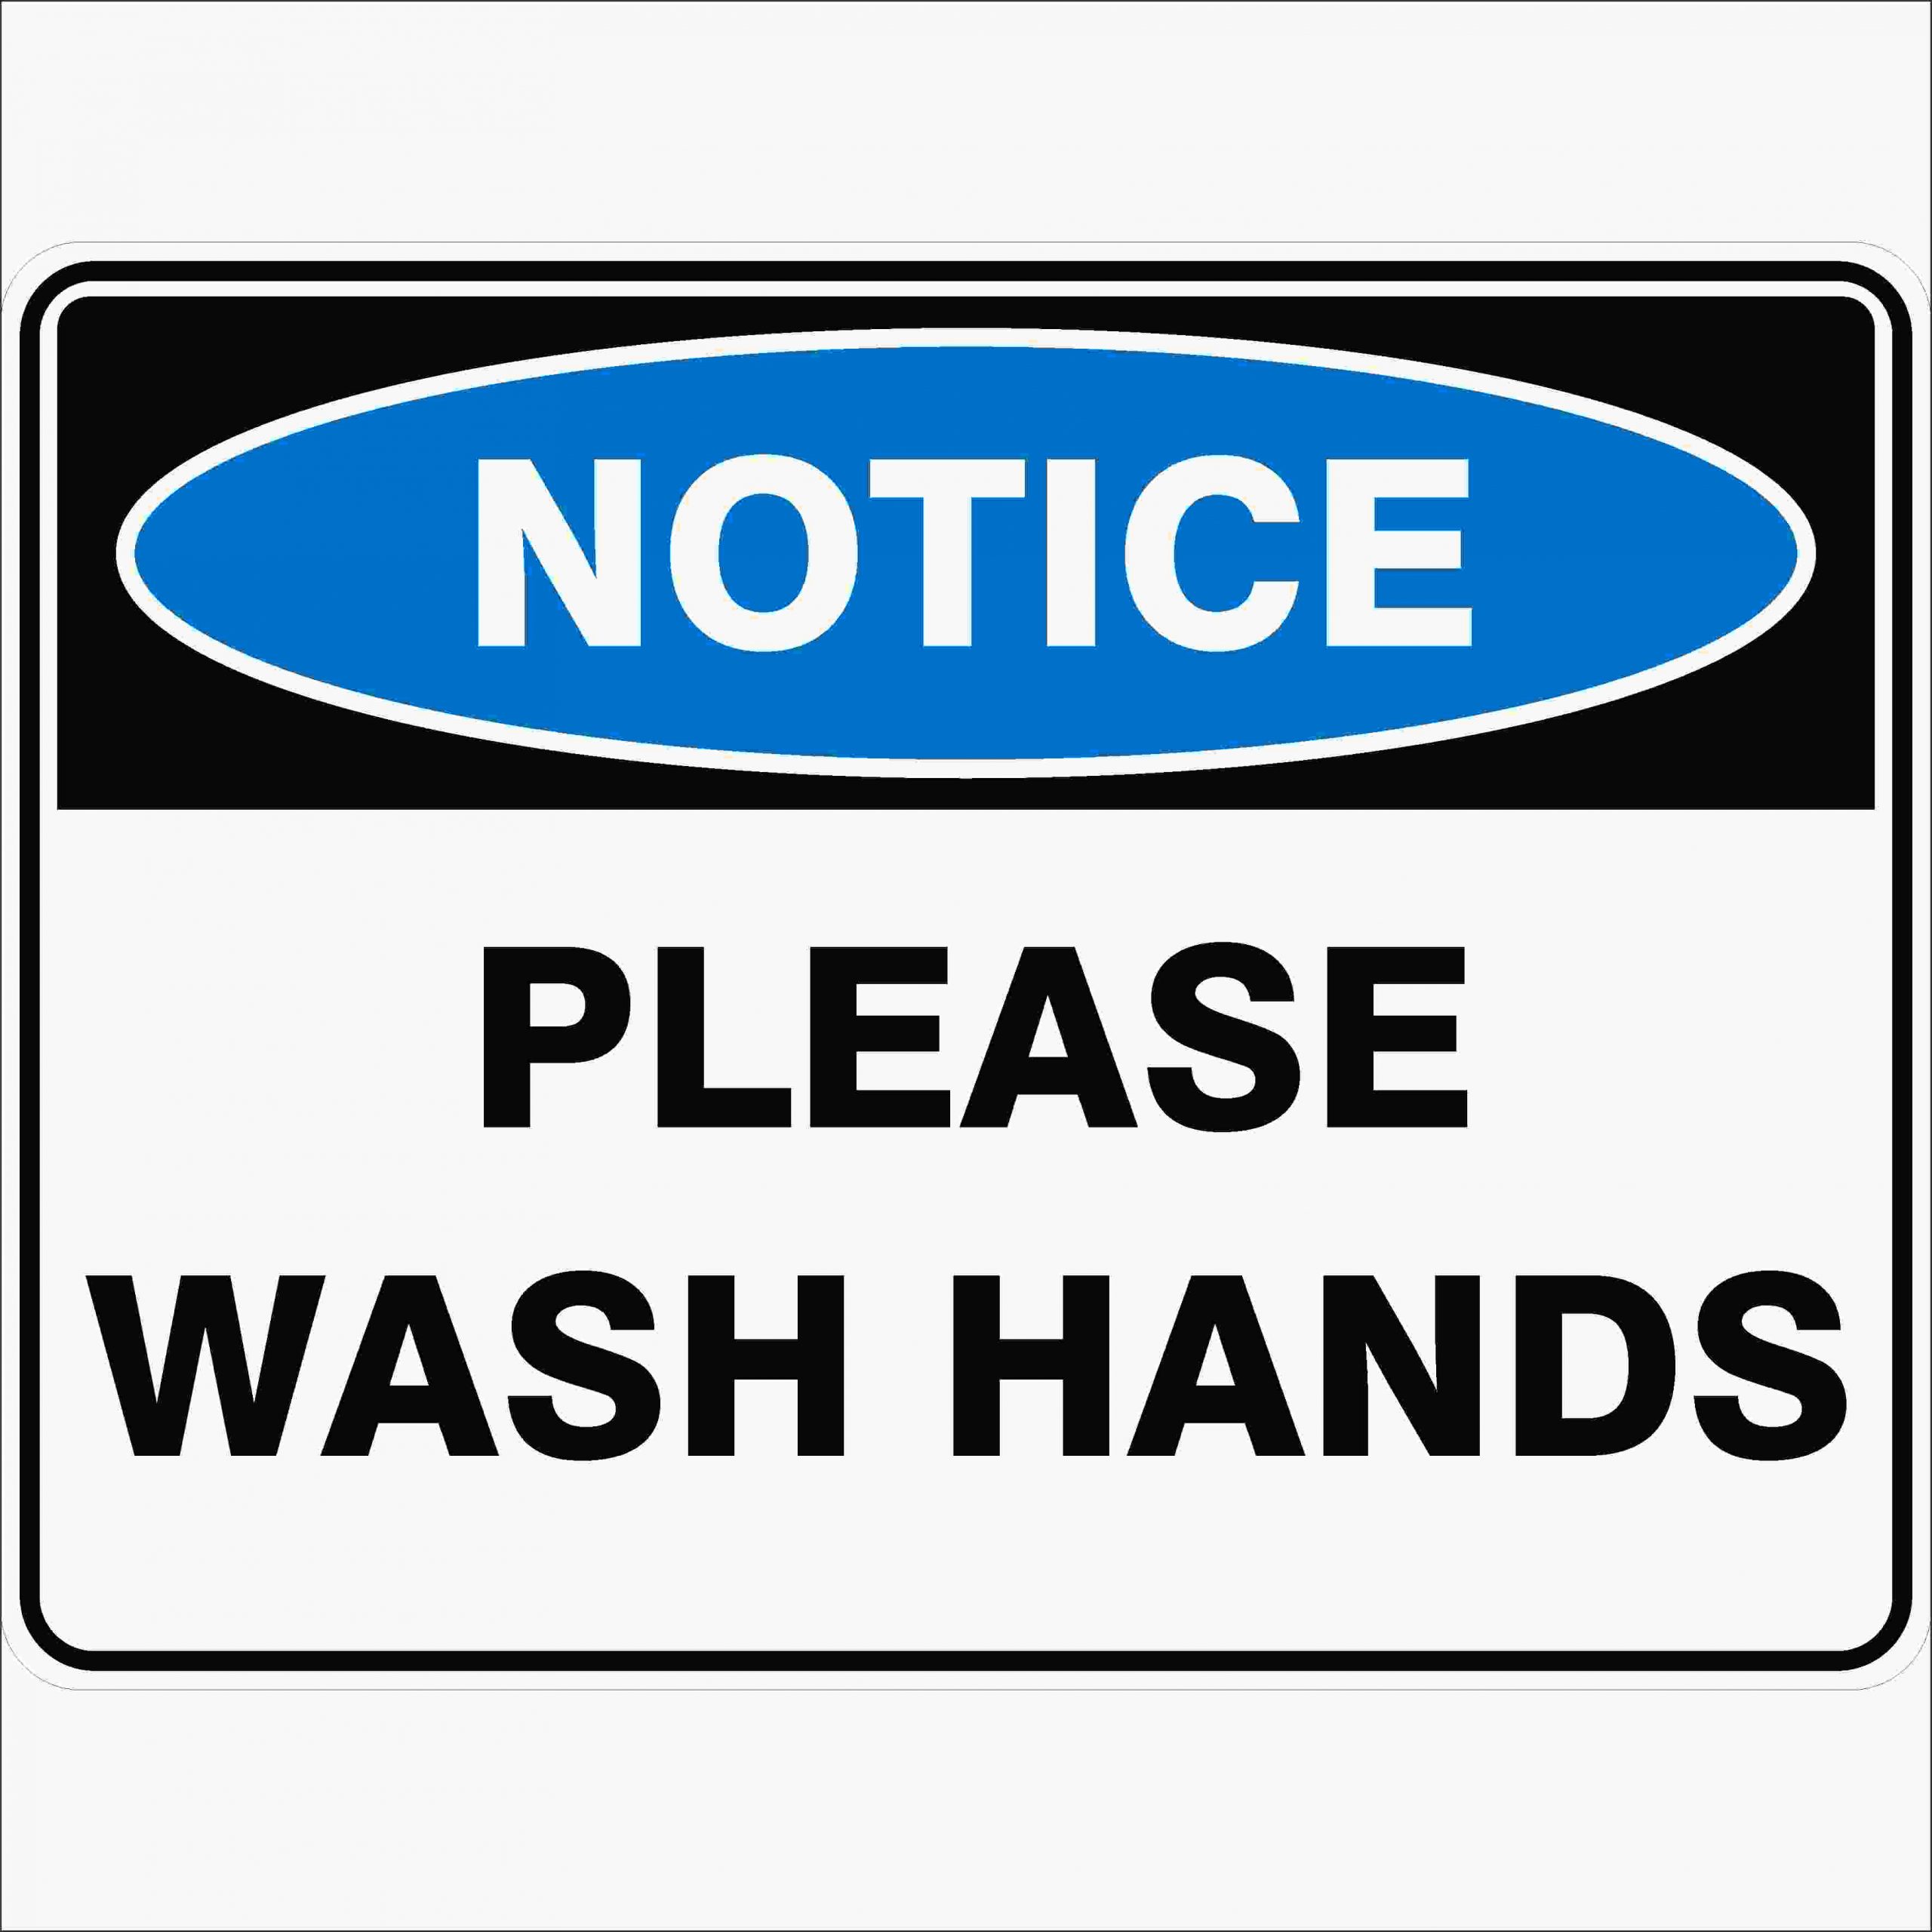 Notice - Please Wash Hands - Safety Sign